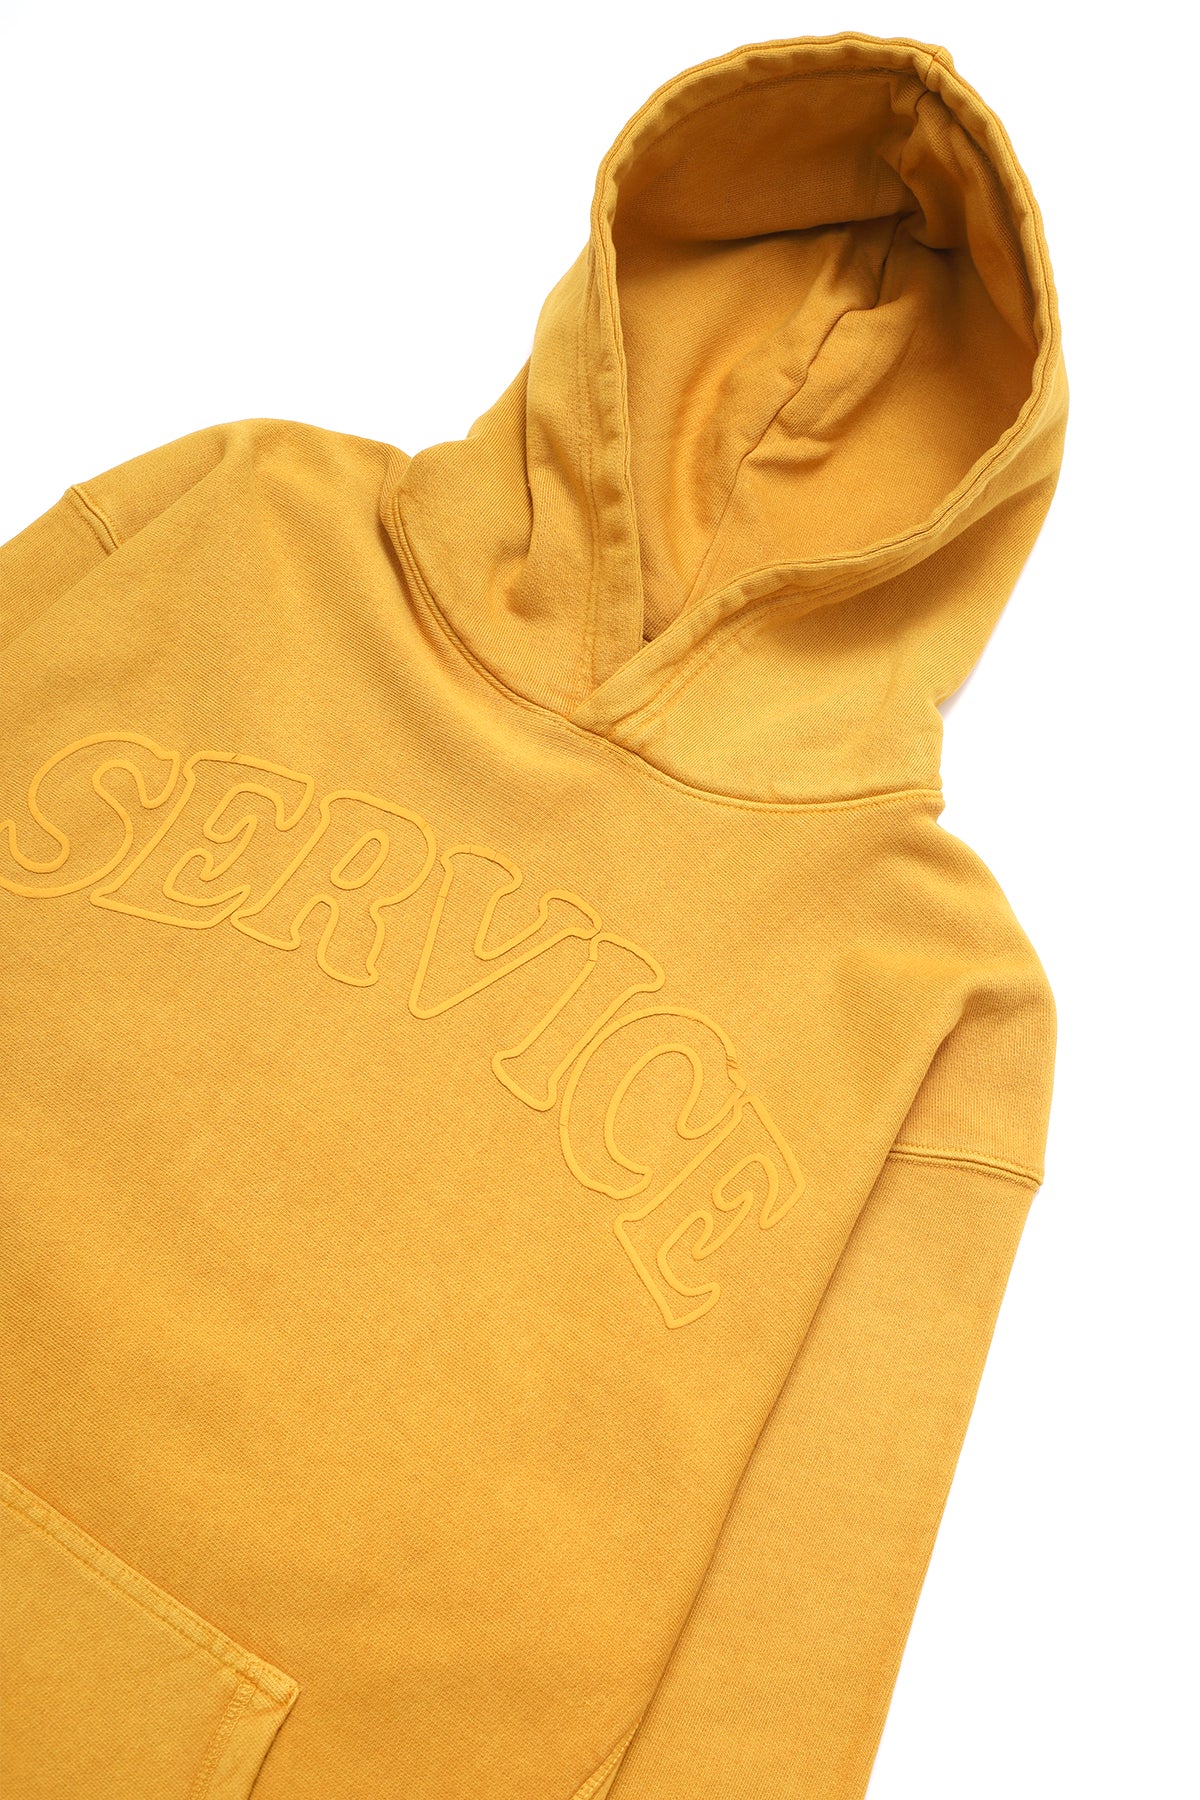 Service Works - Arch Logo Hoodie - Gold